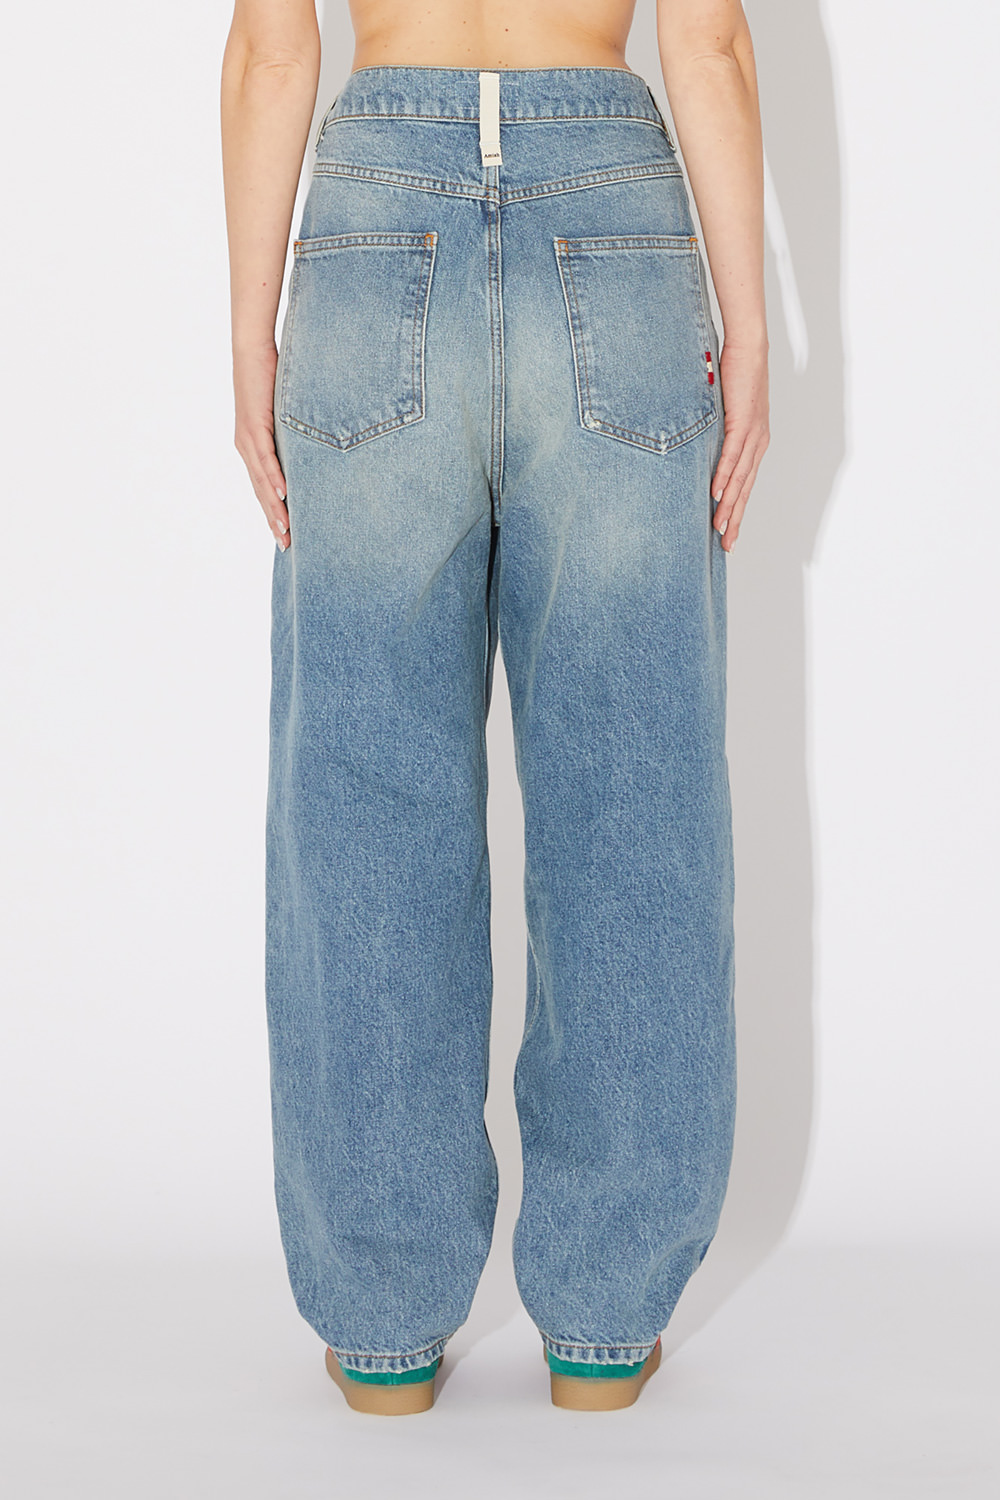 AMISH: REAL VINTAGE BAGGY JEANS